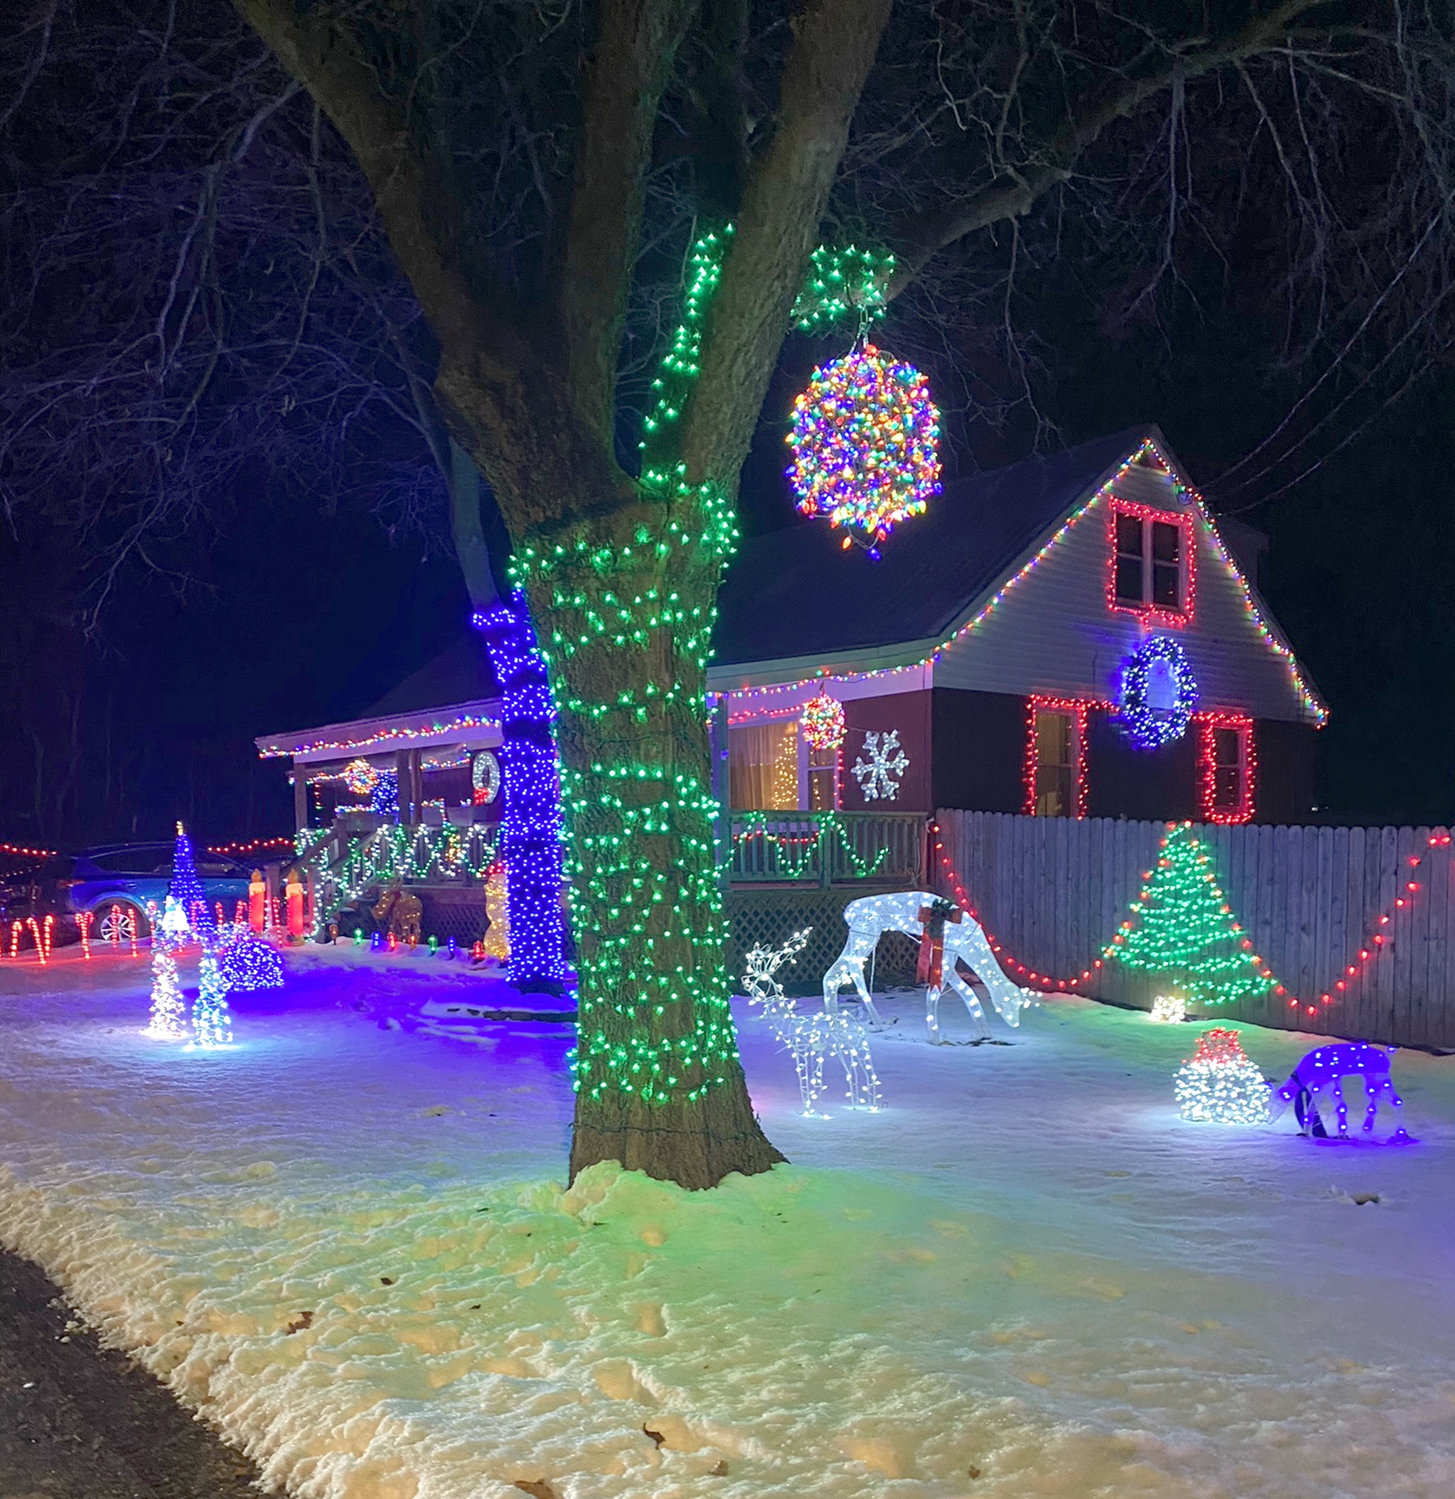 SECOND PLACE — Oneida’s first Light Fight saw Chris Kimball and his family, of 509 Lincoln Ave., take home second prize and a slew of gift cards from local businesses. The home featured a host of festive lights that danced on fresh fallen snow.